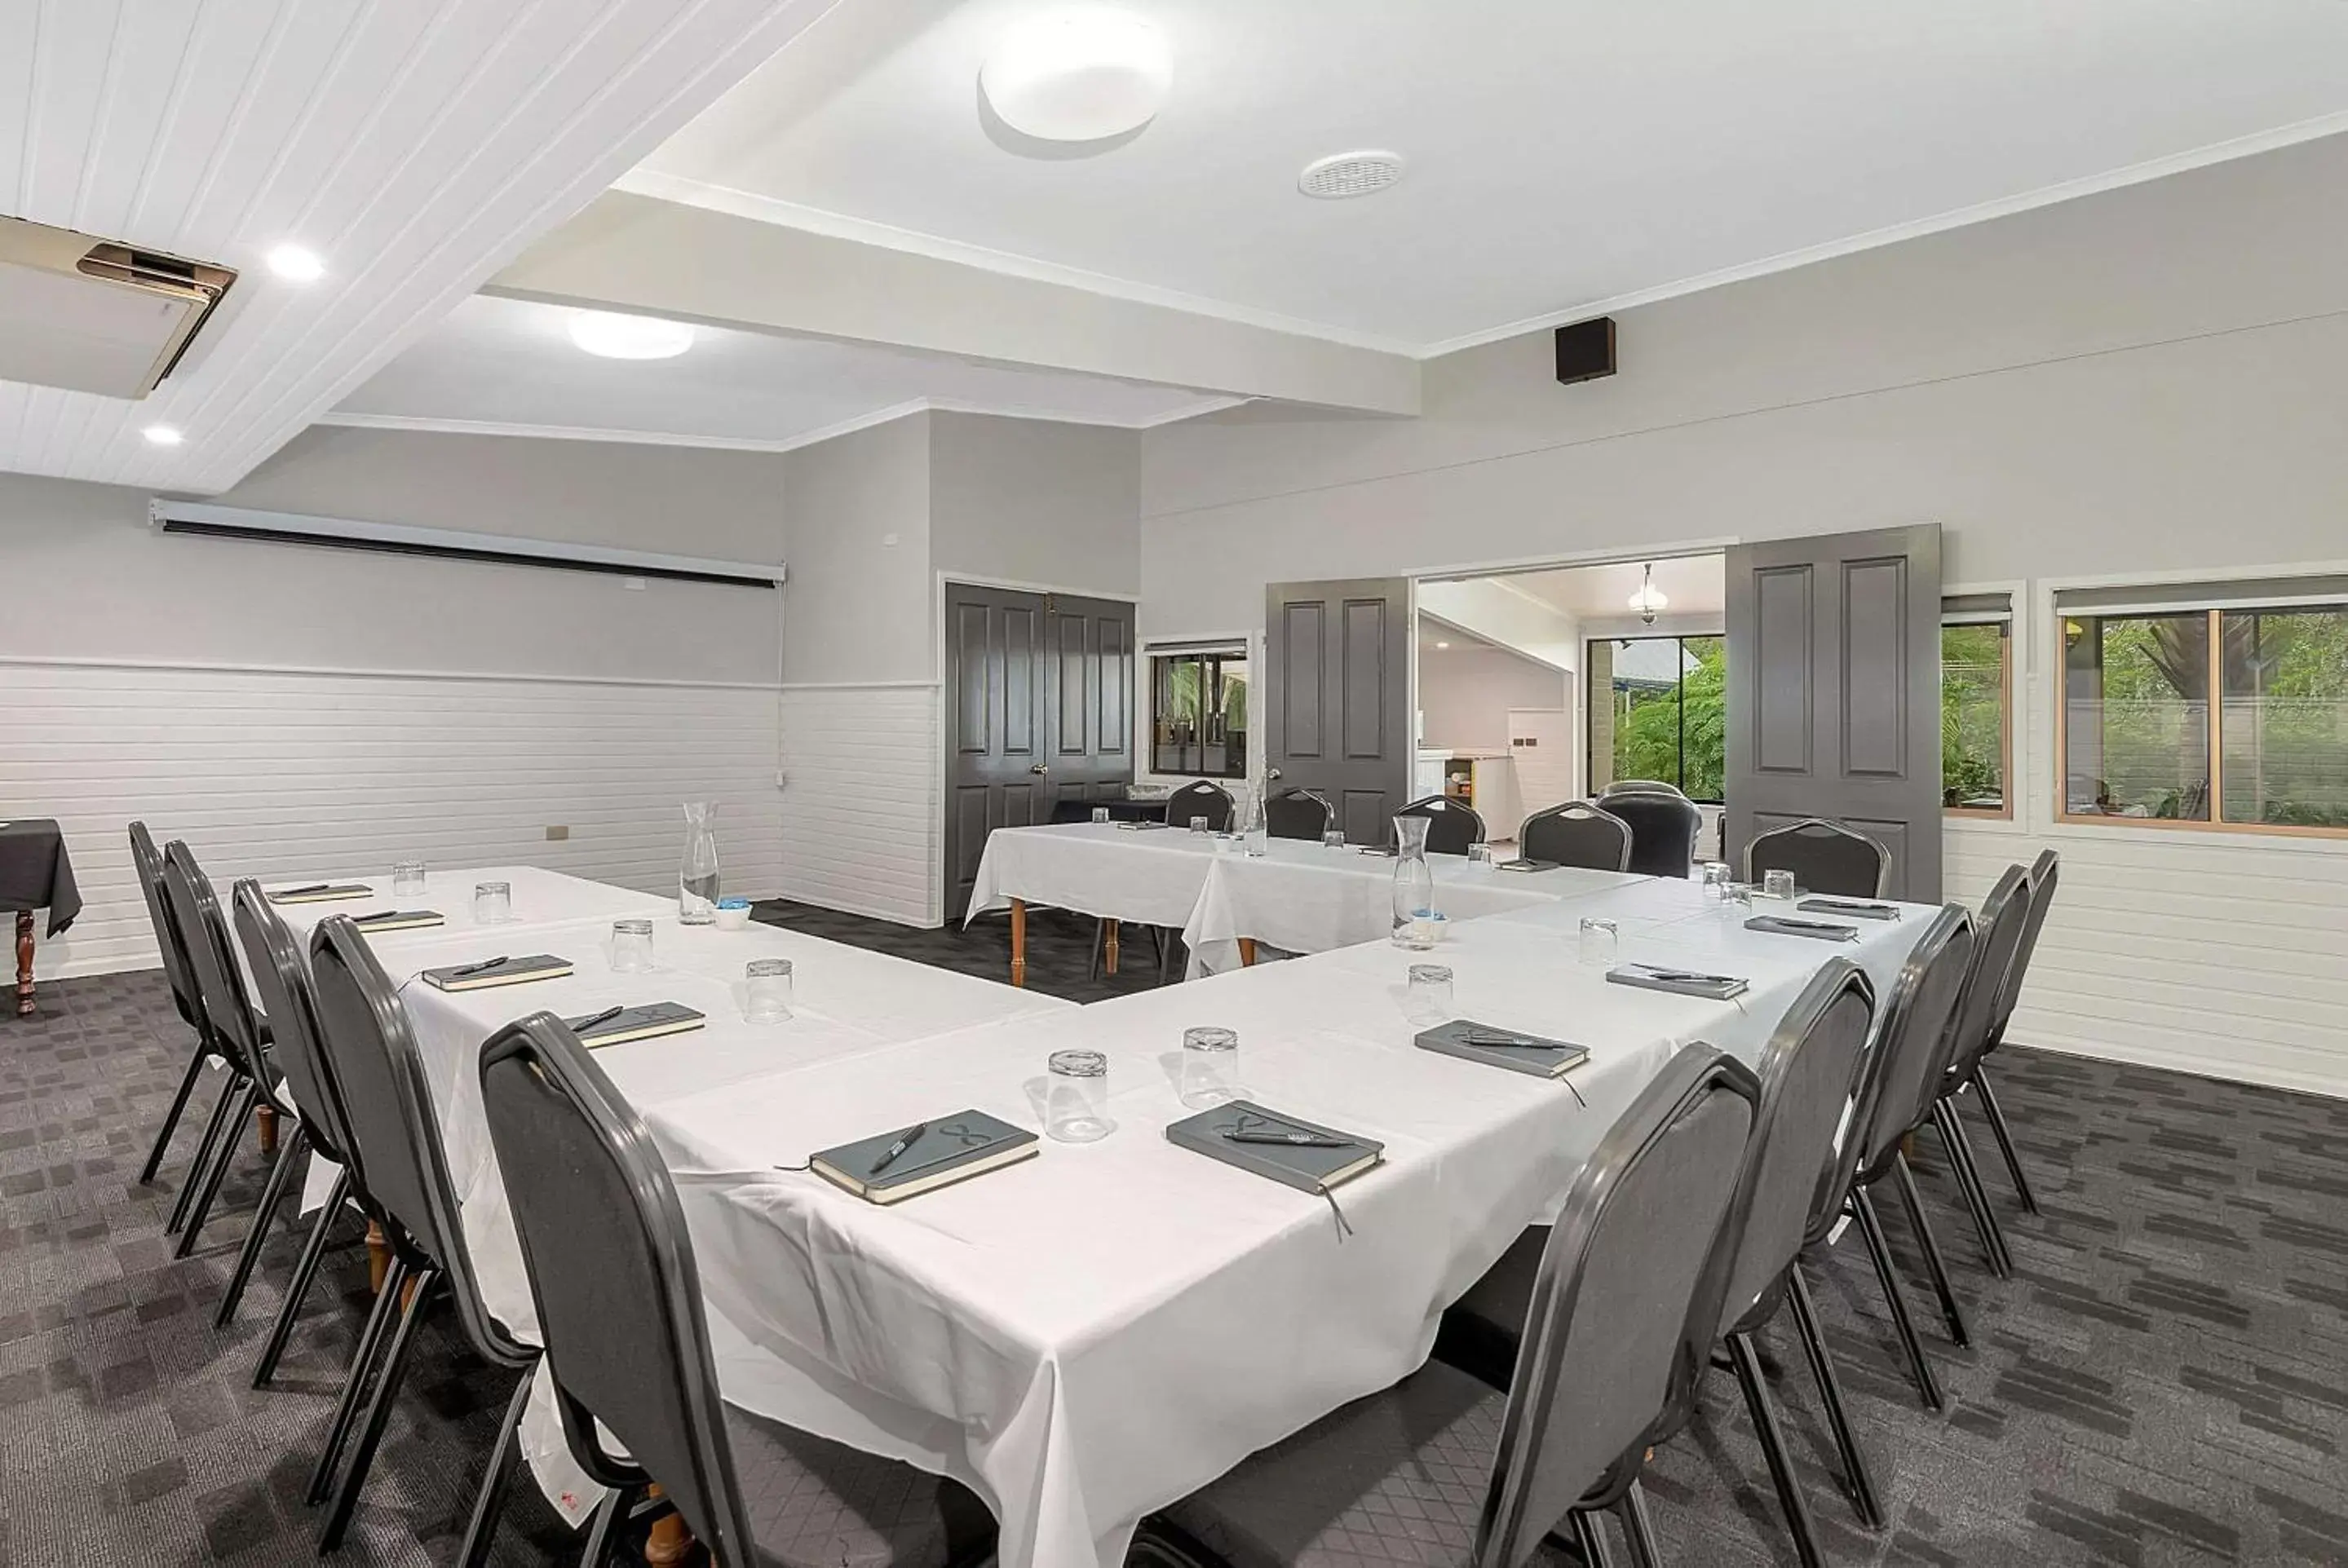 On site in Toowoomba Motel & Events Centre